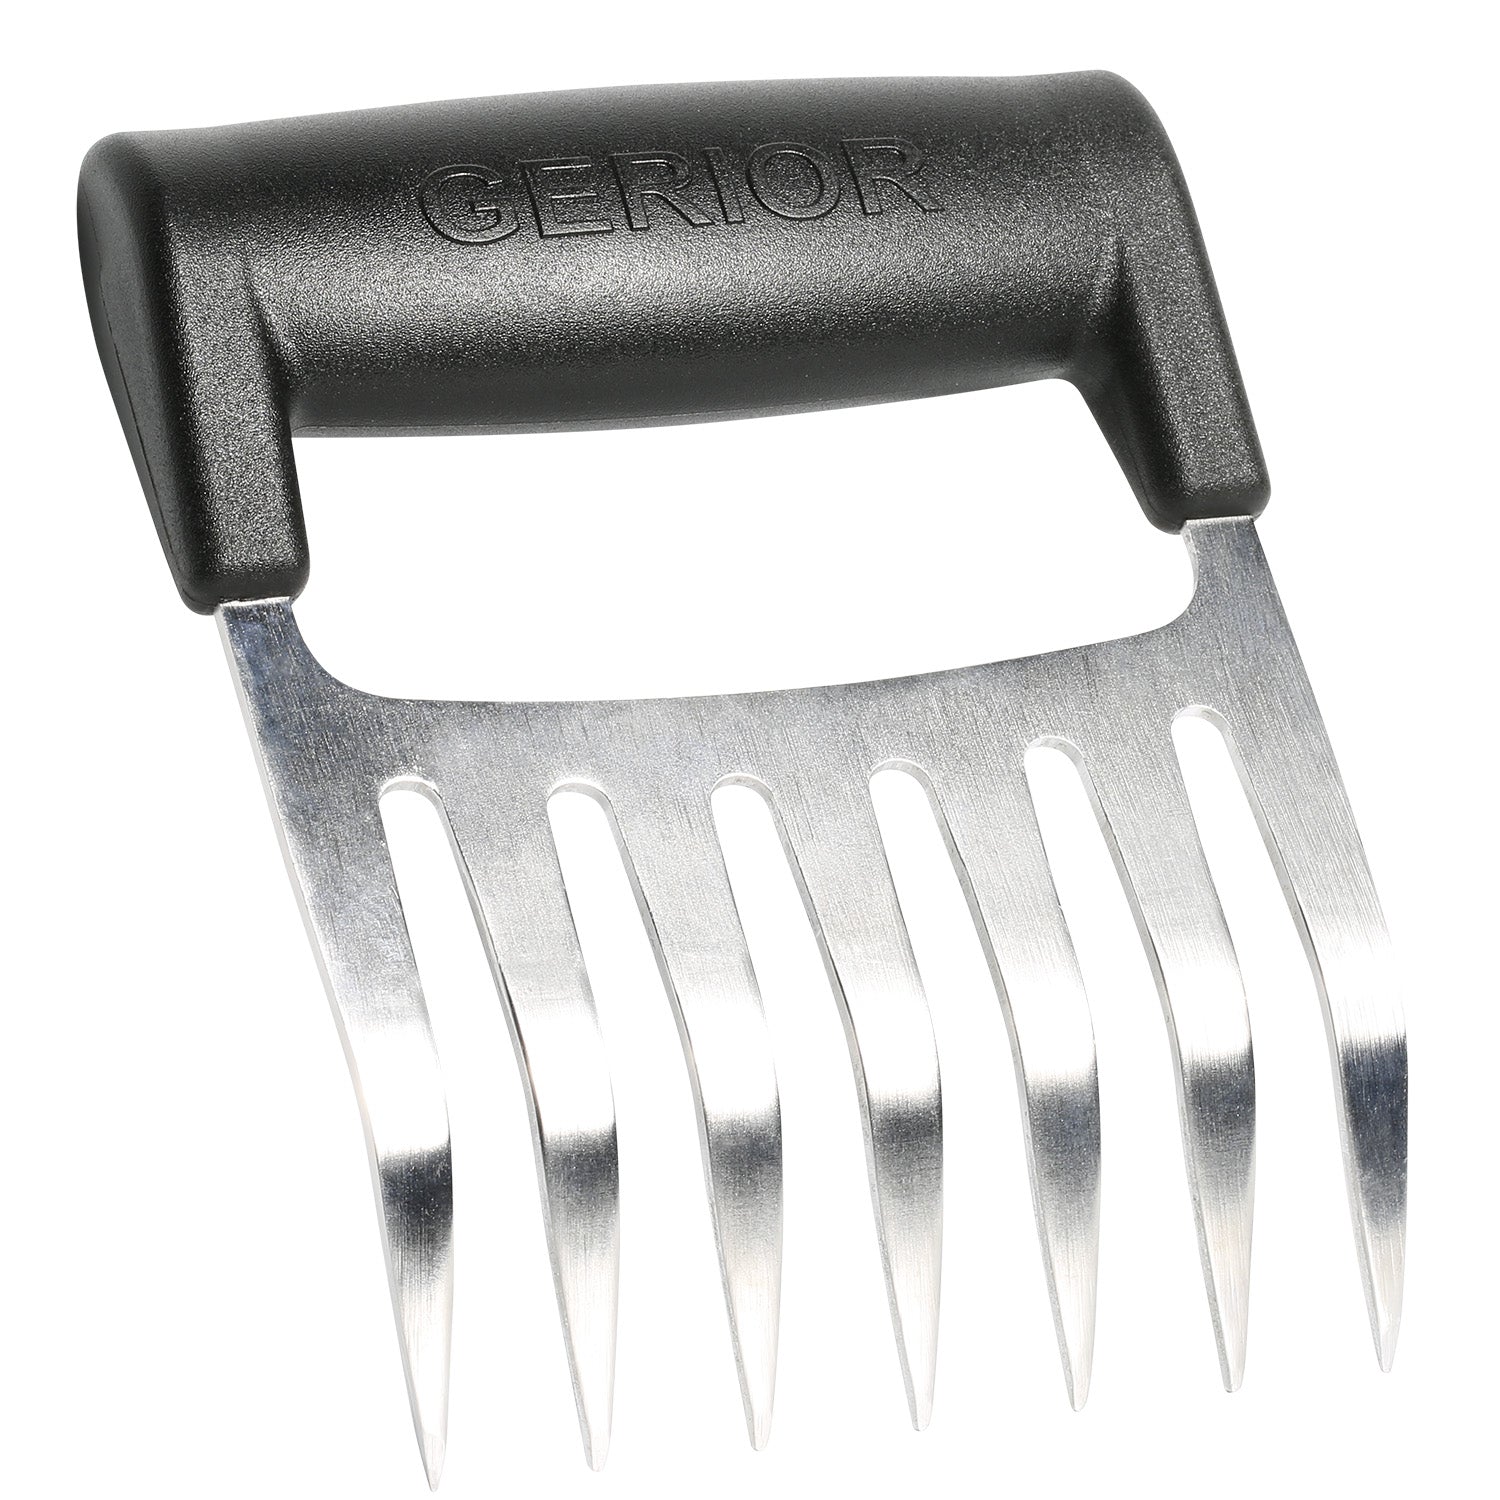 Gerior Meat Shredder Claws for Shredding Pulled Pork, Chicken - Stainless Steel BBQ Tool - Large Size